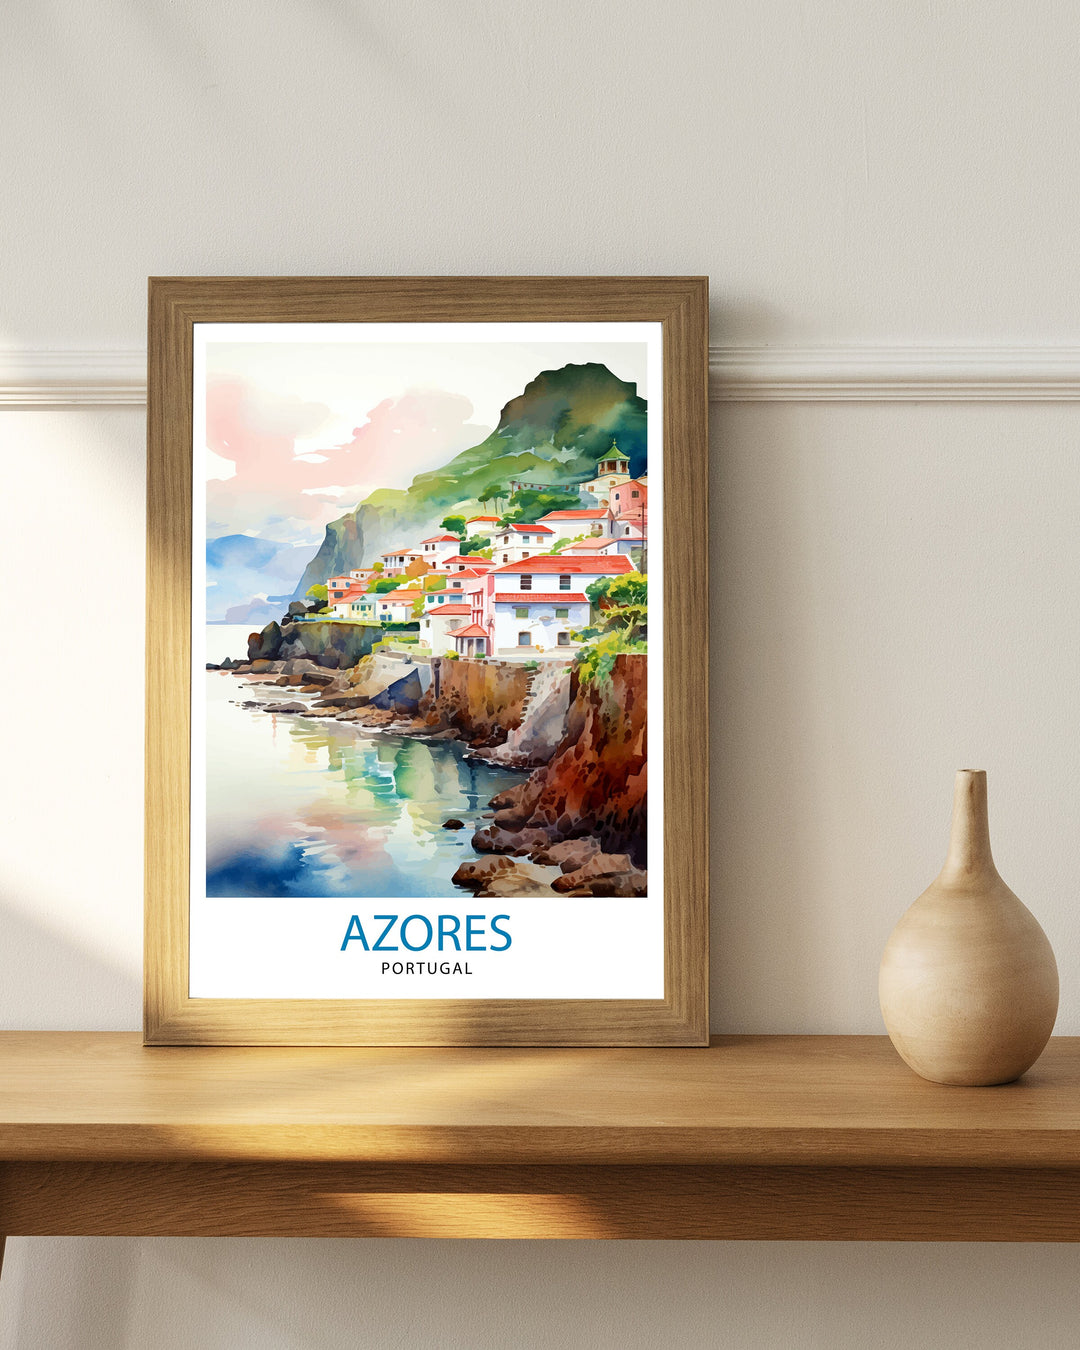 Azores Portugal Poster Azores Decor Azores Poster Azores Art Azores Wall Art Gift for Nature Enthusiasts Azores Home Decor